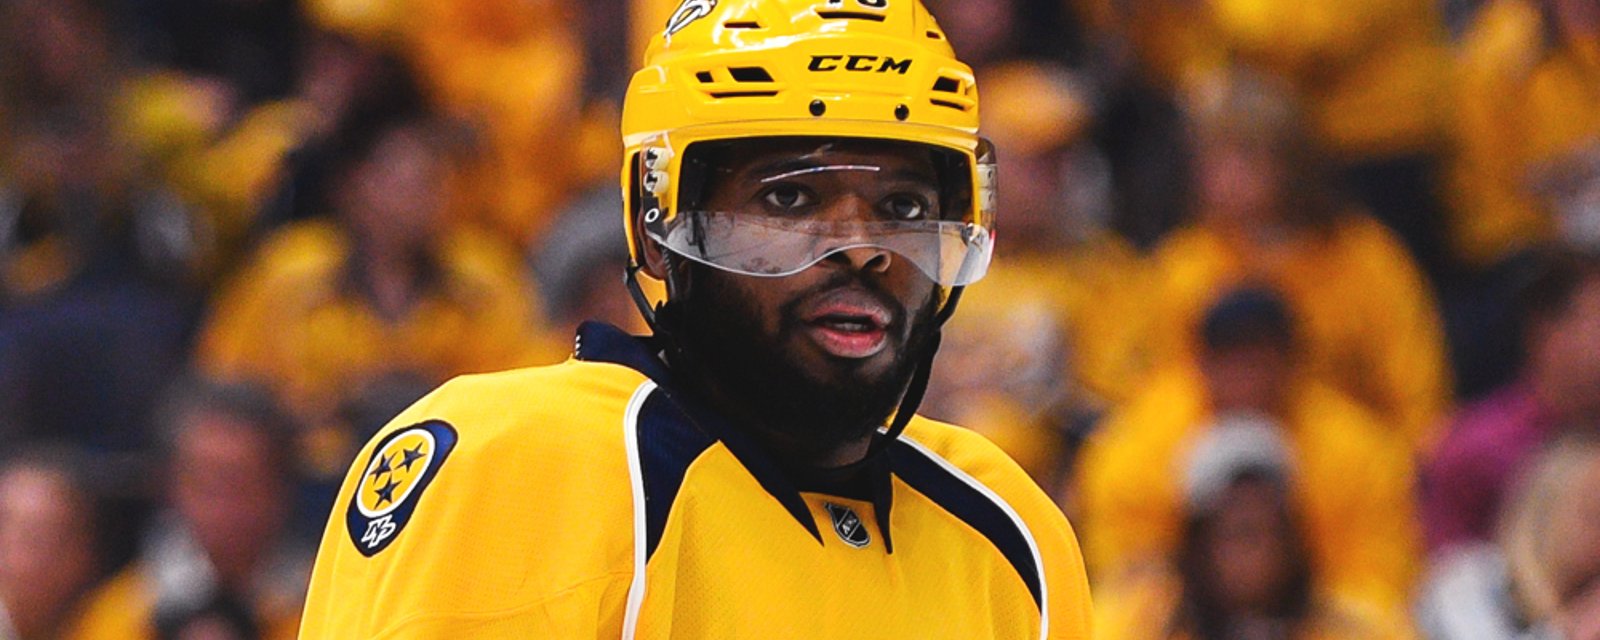 P.K. Subban answers John Scott calling him a “piece of garbage” in incredible fashion!